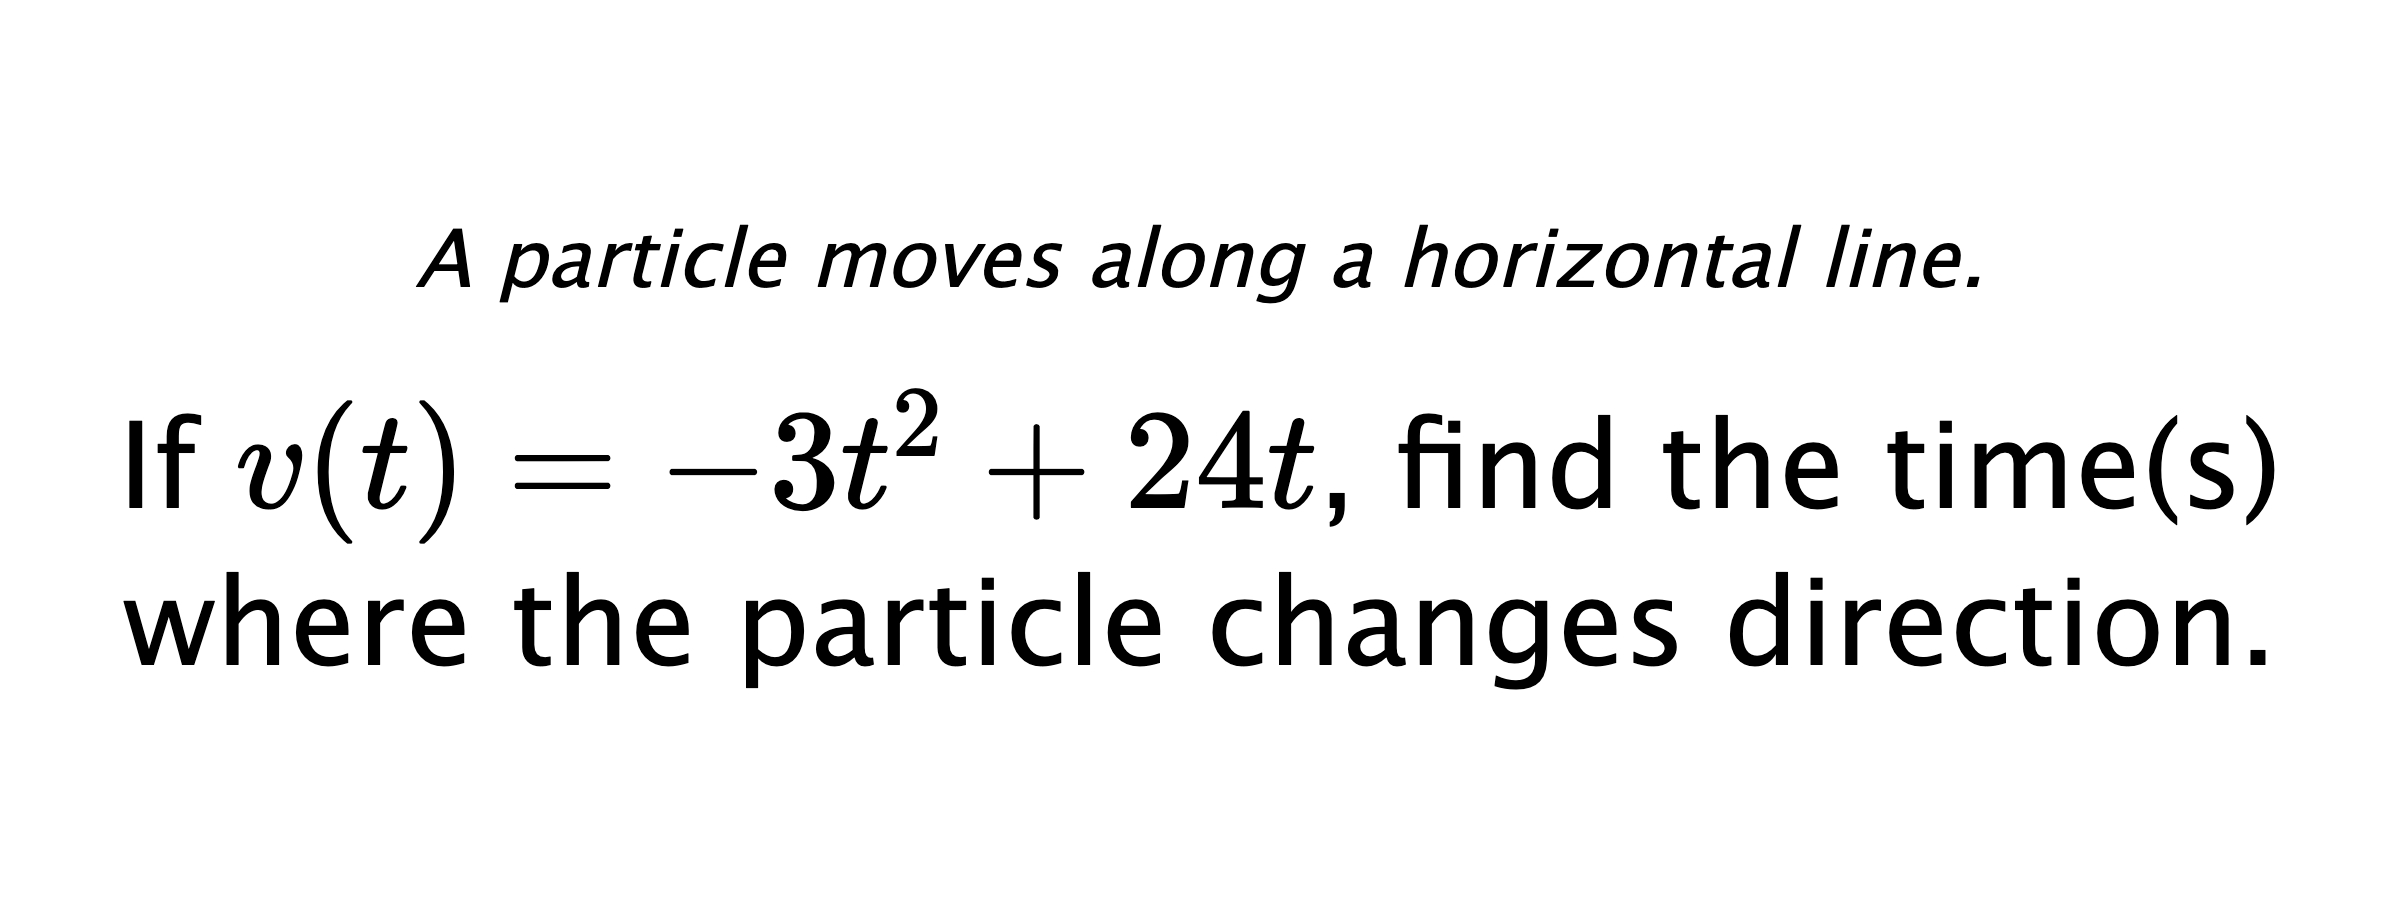 A particle moves along a horizontal line. If $ v(t)=-3t^2+24t $, find the time(s) where the particle changes direction.